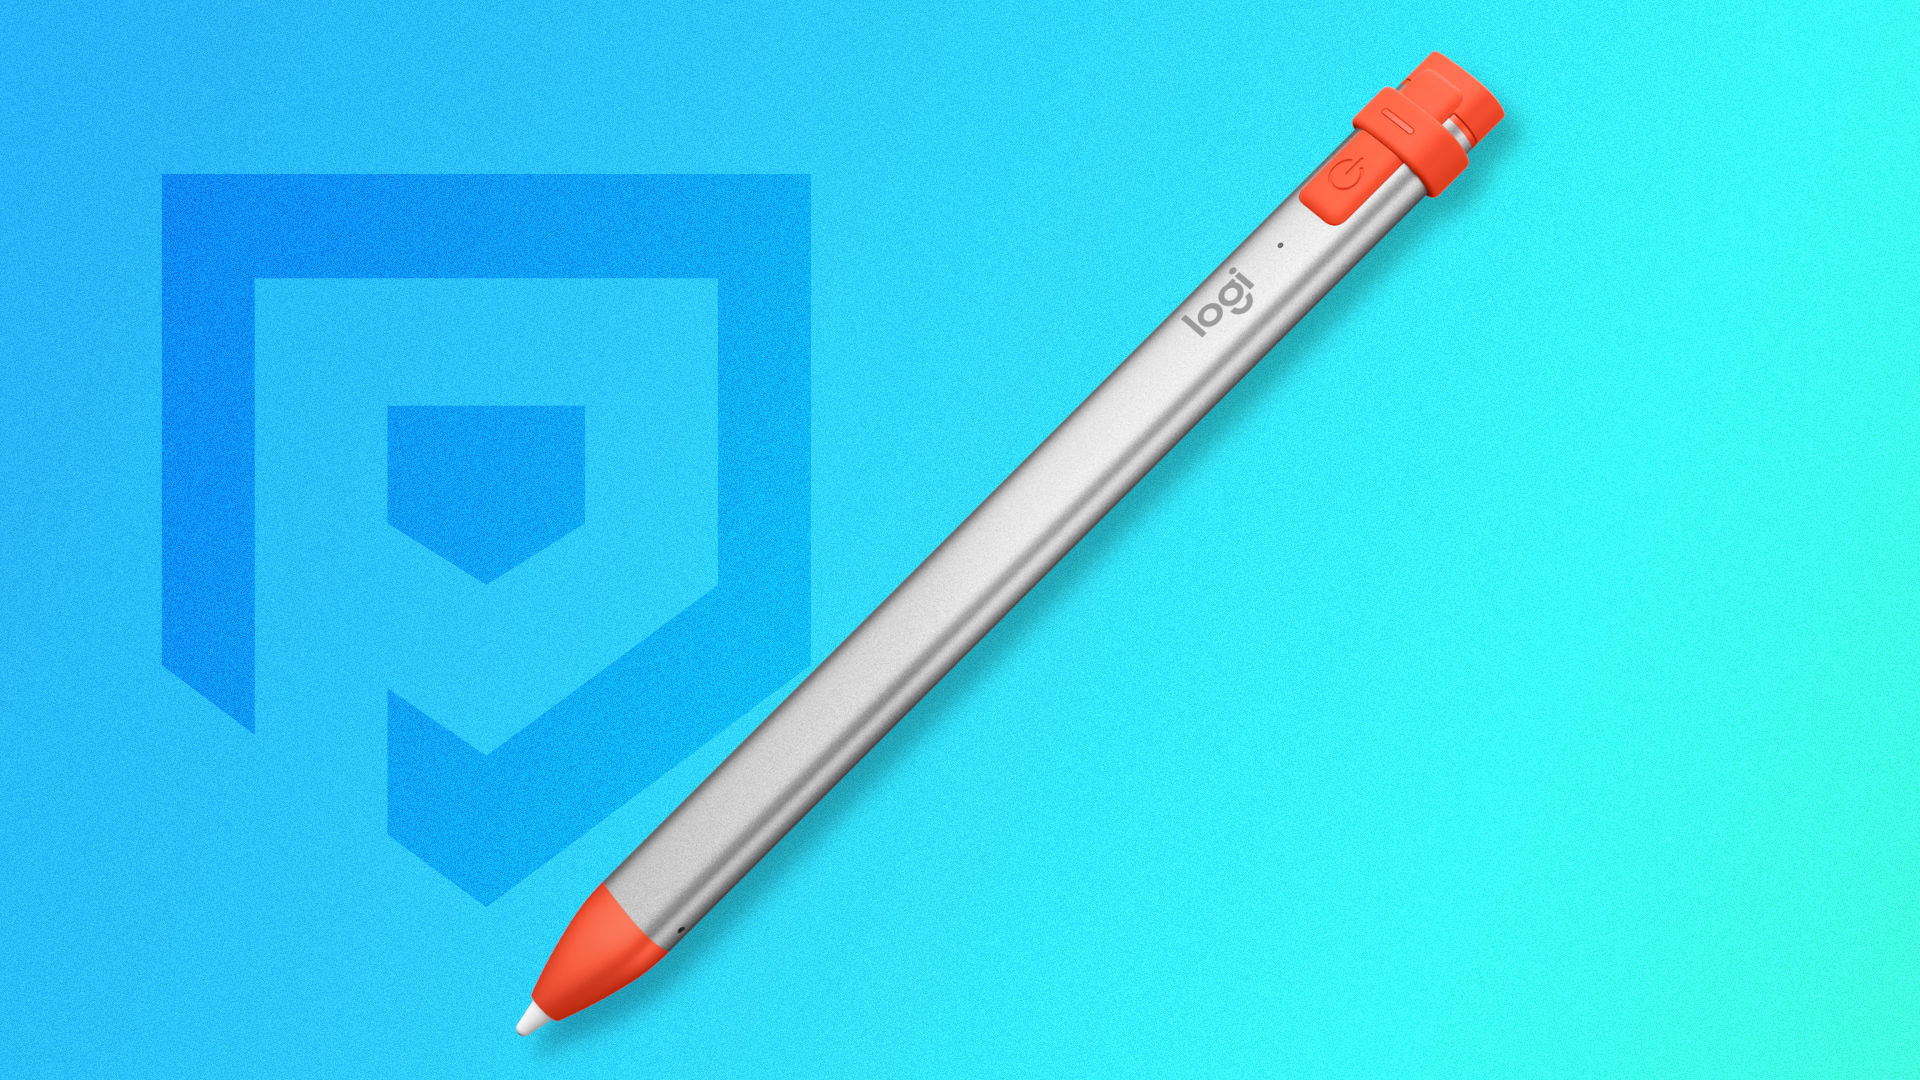 A picture of one of the best stylus for iPad and iPhone, the Logitech Crayon, against a blue Pocket Tactics background